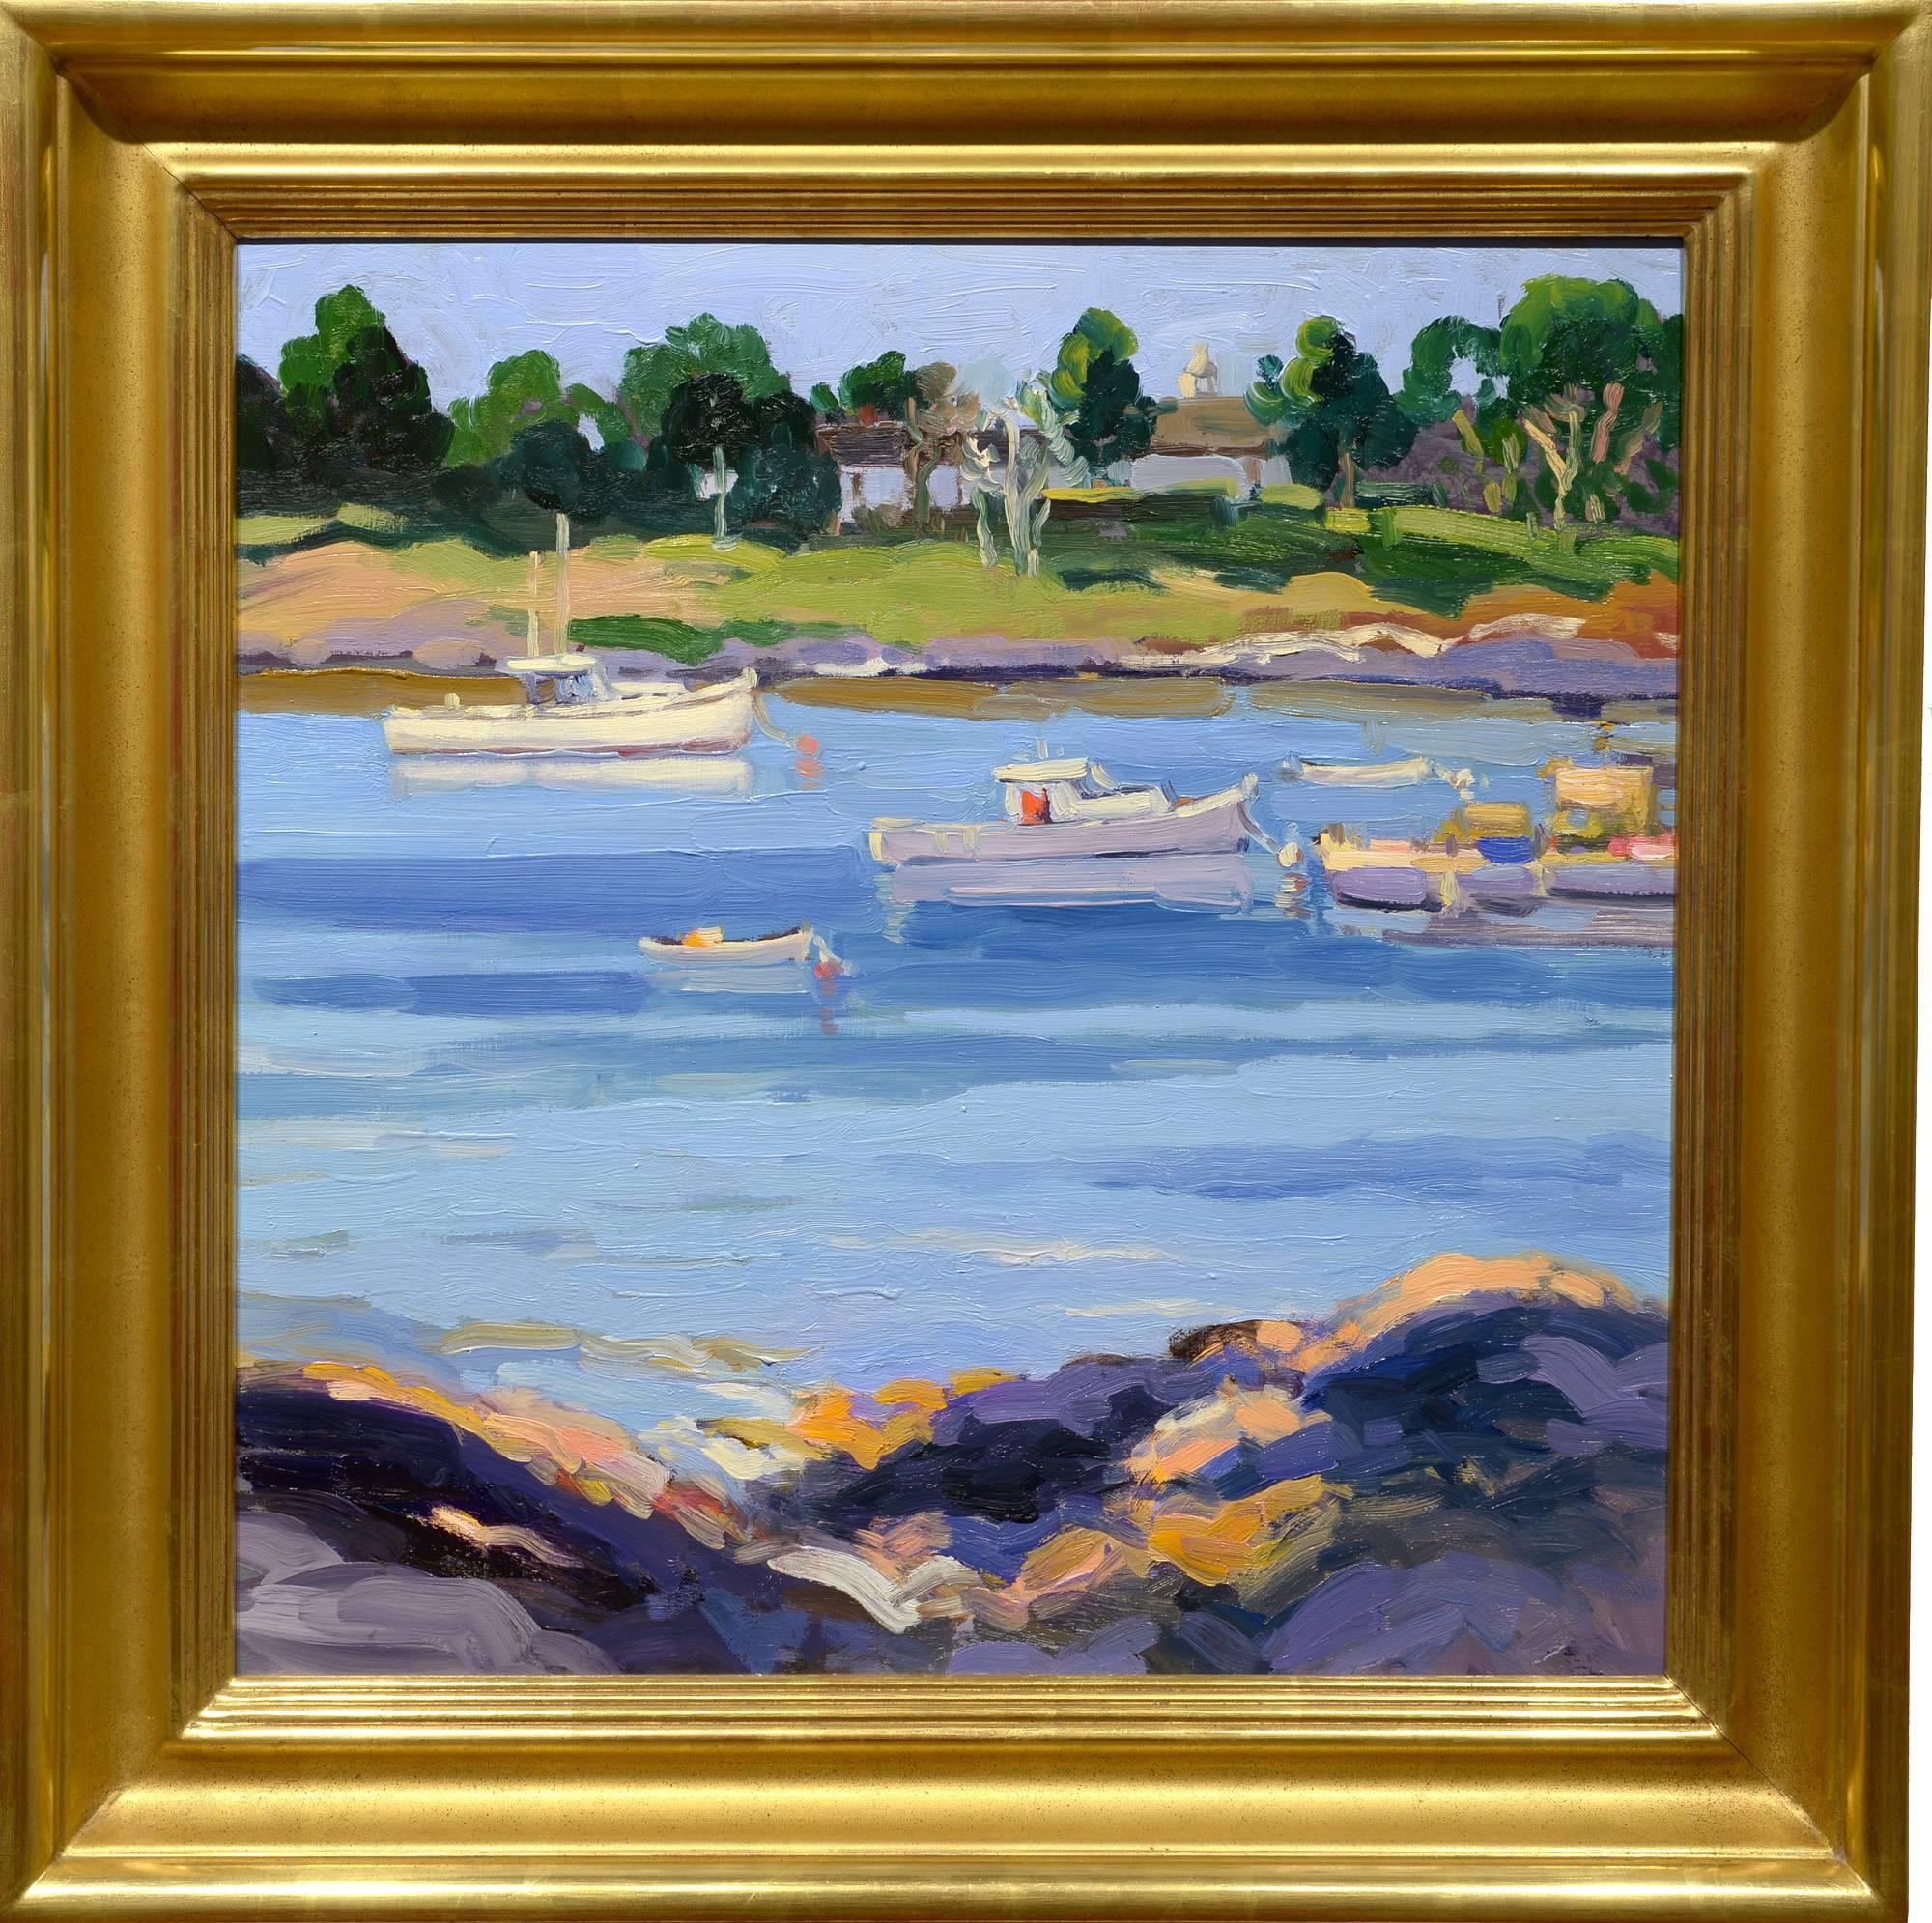 At Steamboat Wharf, Bailey's Island - Painting by Keith Oehmig